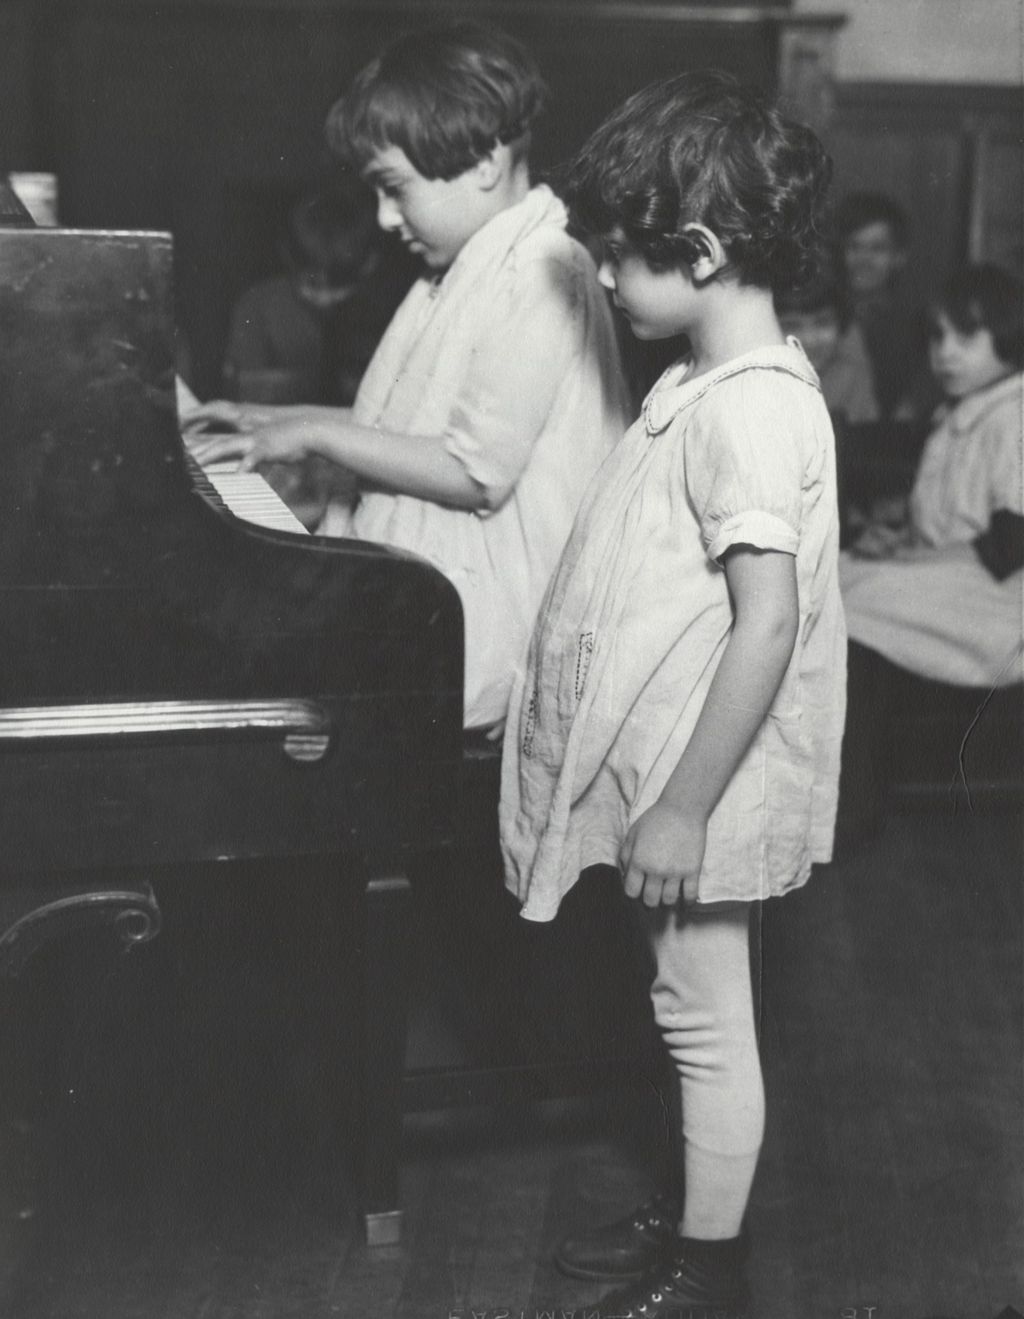 Girl playing piano while another girl watches